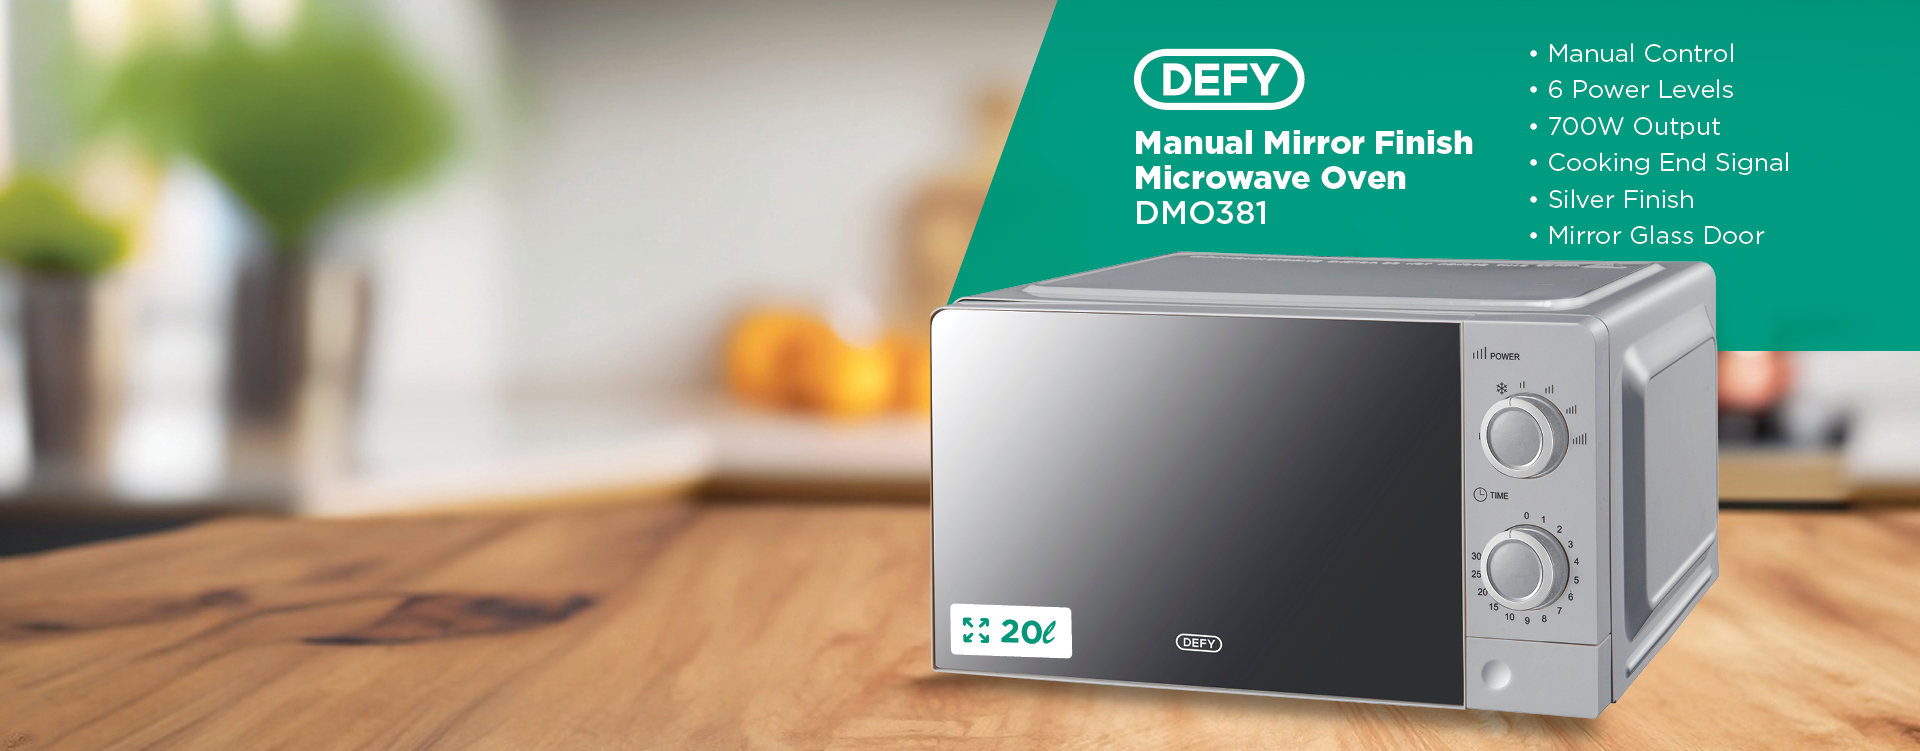 UNBEATABLE VALUE! GET A NEW MICROWAVE FOR UNDER R1000